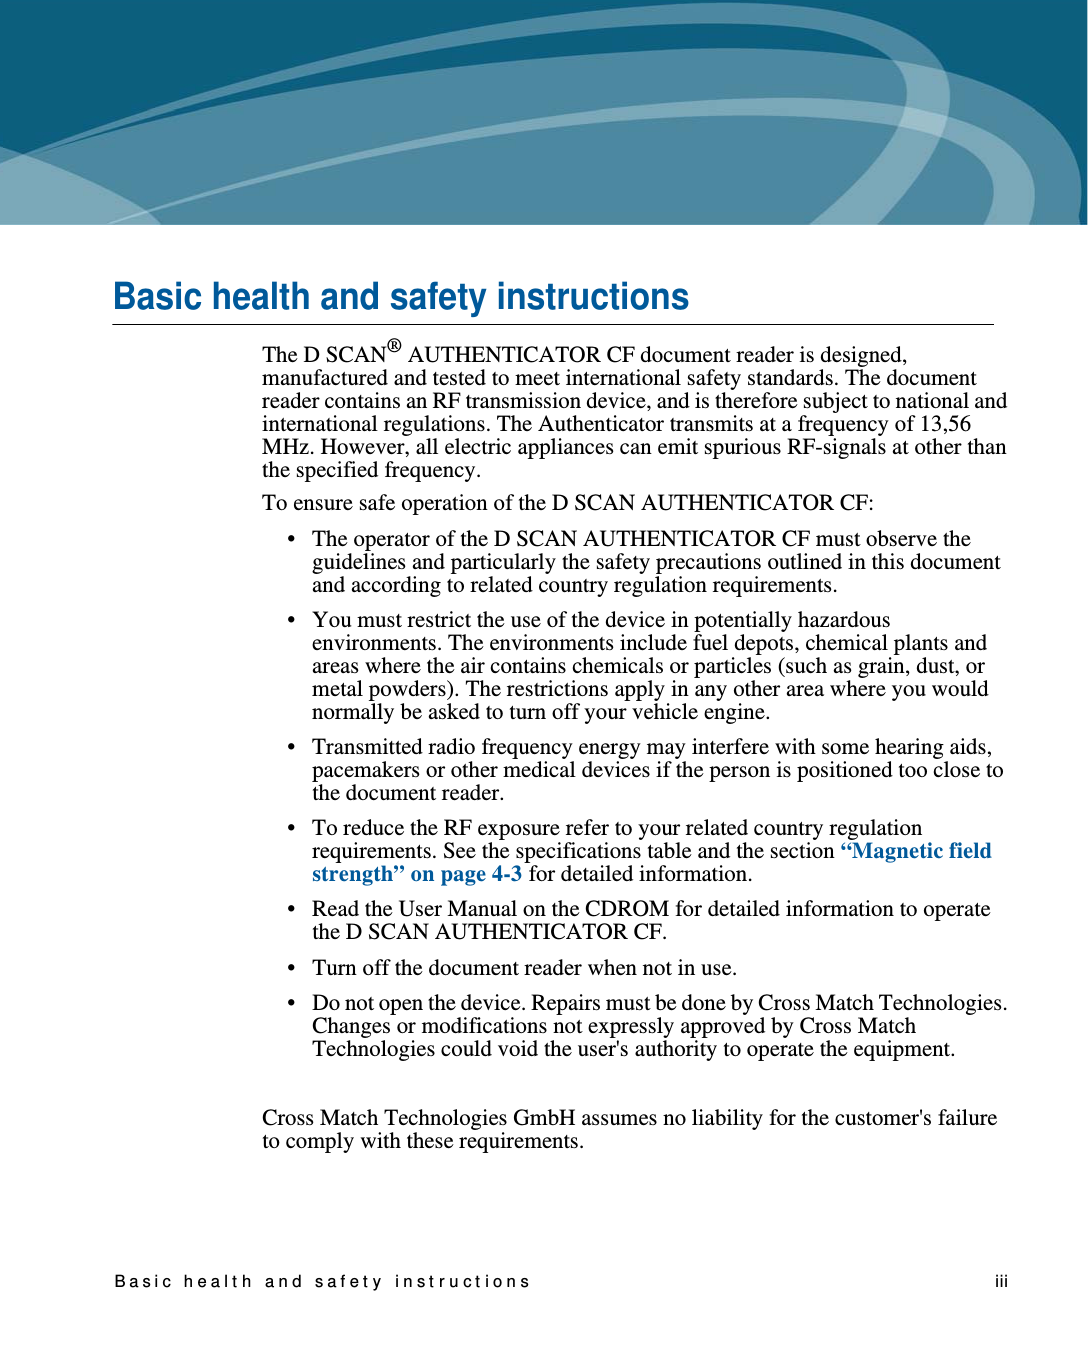 Basic healt h and safet y instructions    iiiBasic health and safety instructionsThe D SCAN® AUTHENTICATOR CF document reader is designed, manufactured and tested to meet international safety standards. The document reader contains an RF transmission device, and is therefore subject to national and international regulations. The Authenticator transmits at a frequency of 13,56 MHz. However, all electric appliances can emit spurious RF-signals at other than the specified frequency.To ensure safe operation of the D SCAN AUTHENTICATOR CF: • The operator of the D SCAN AUTHENTICATOR CF must observe the guidelines and particularly the safety precautions outlined in this document and according to related country regulation requirements.• You must restrict the use of the device in potentially hazardous environments. The environments include fuel depots, chemical plants and areas where the air contains chemicals or particles (such as grain, dust, or metal powders). The restrictions apply in any other area where you would normally be asked to turn off your vehicle engine.• Transmitted radio frequency energy may interfere with some hearing aids, pacemakers or other medical devices if the person is positioned too close to the document reader.• To reduce the RF exposure refer to your related country regulation requirements. See the specifications table and the section “Magnetic field strength” on page 4-3 for detailed information.• Read the User Manual on the CDROM for detailed information to operate the D SCAN AUTHENTICATOR CF.• Turn off the document reader when not in use.• Do not open the device. Repairs must be done by Cross Match Technologies. Changes or modifications not expressly approved by Cross Match Technologies could void the user&apos;s authority to operate the equipment.Cross Match Technologies GmbH assumes no liability for the customer&apos;s failure to comply with these requirements.